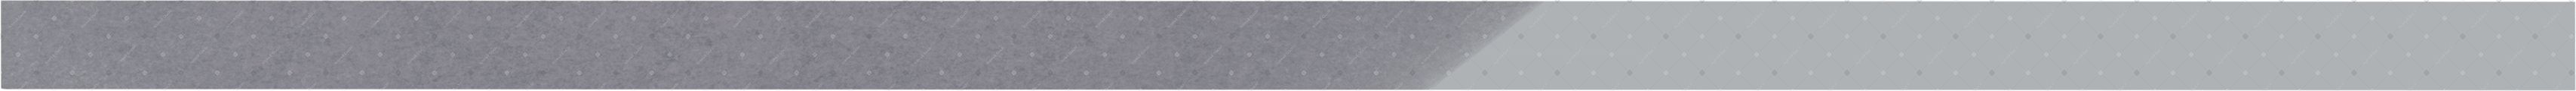 grey countertop Illustration in PNG, SVG